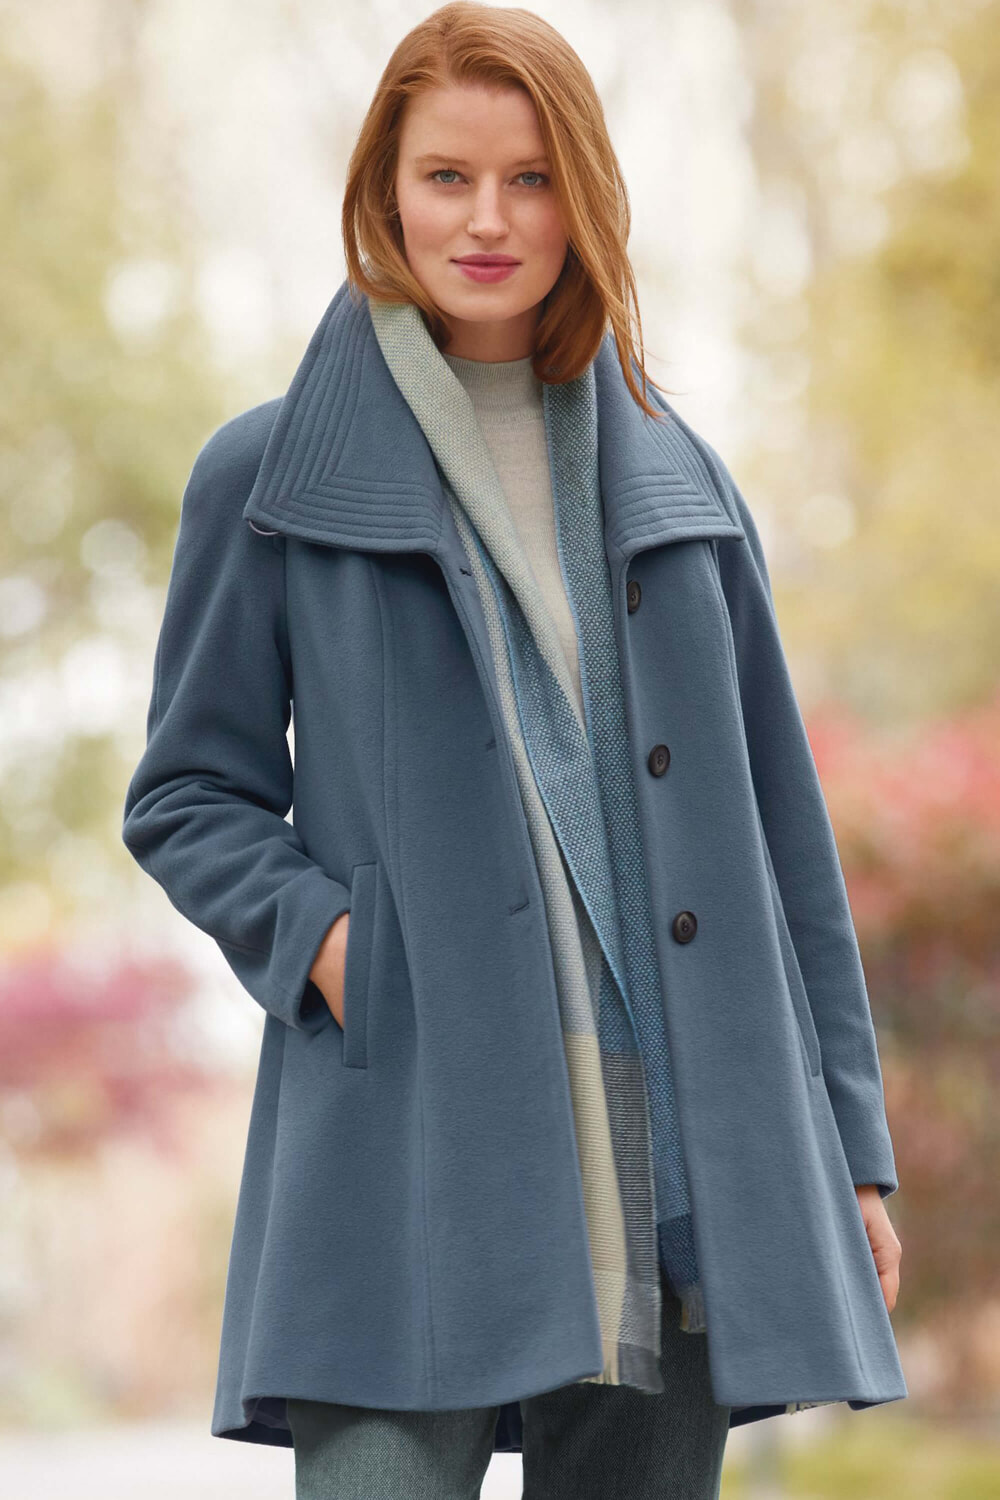 Swing coat, HQ652, Not Available